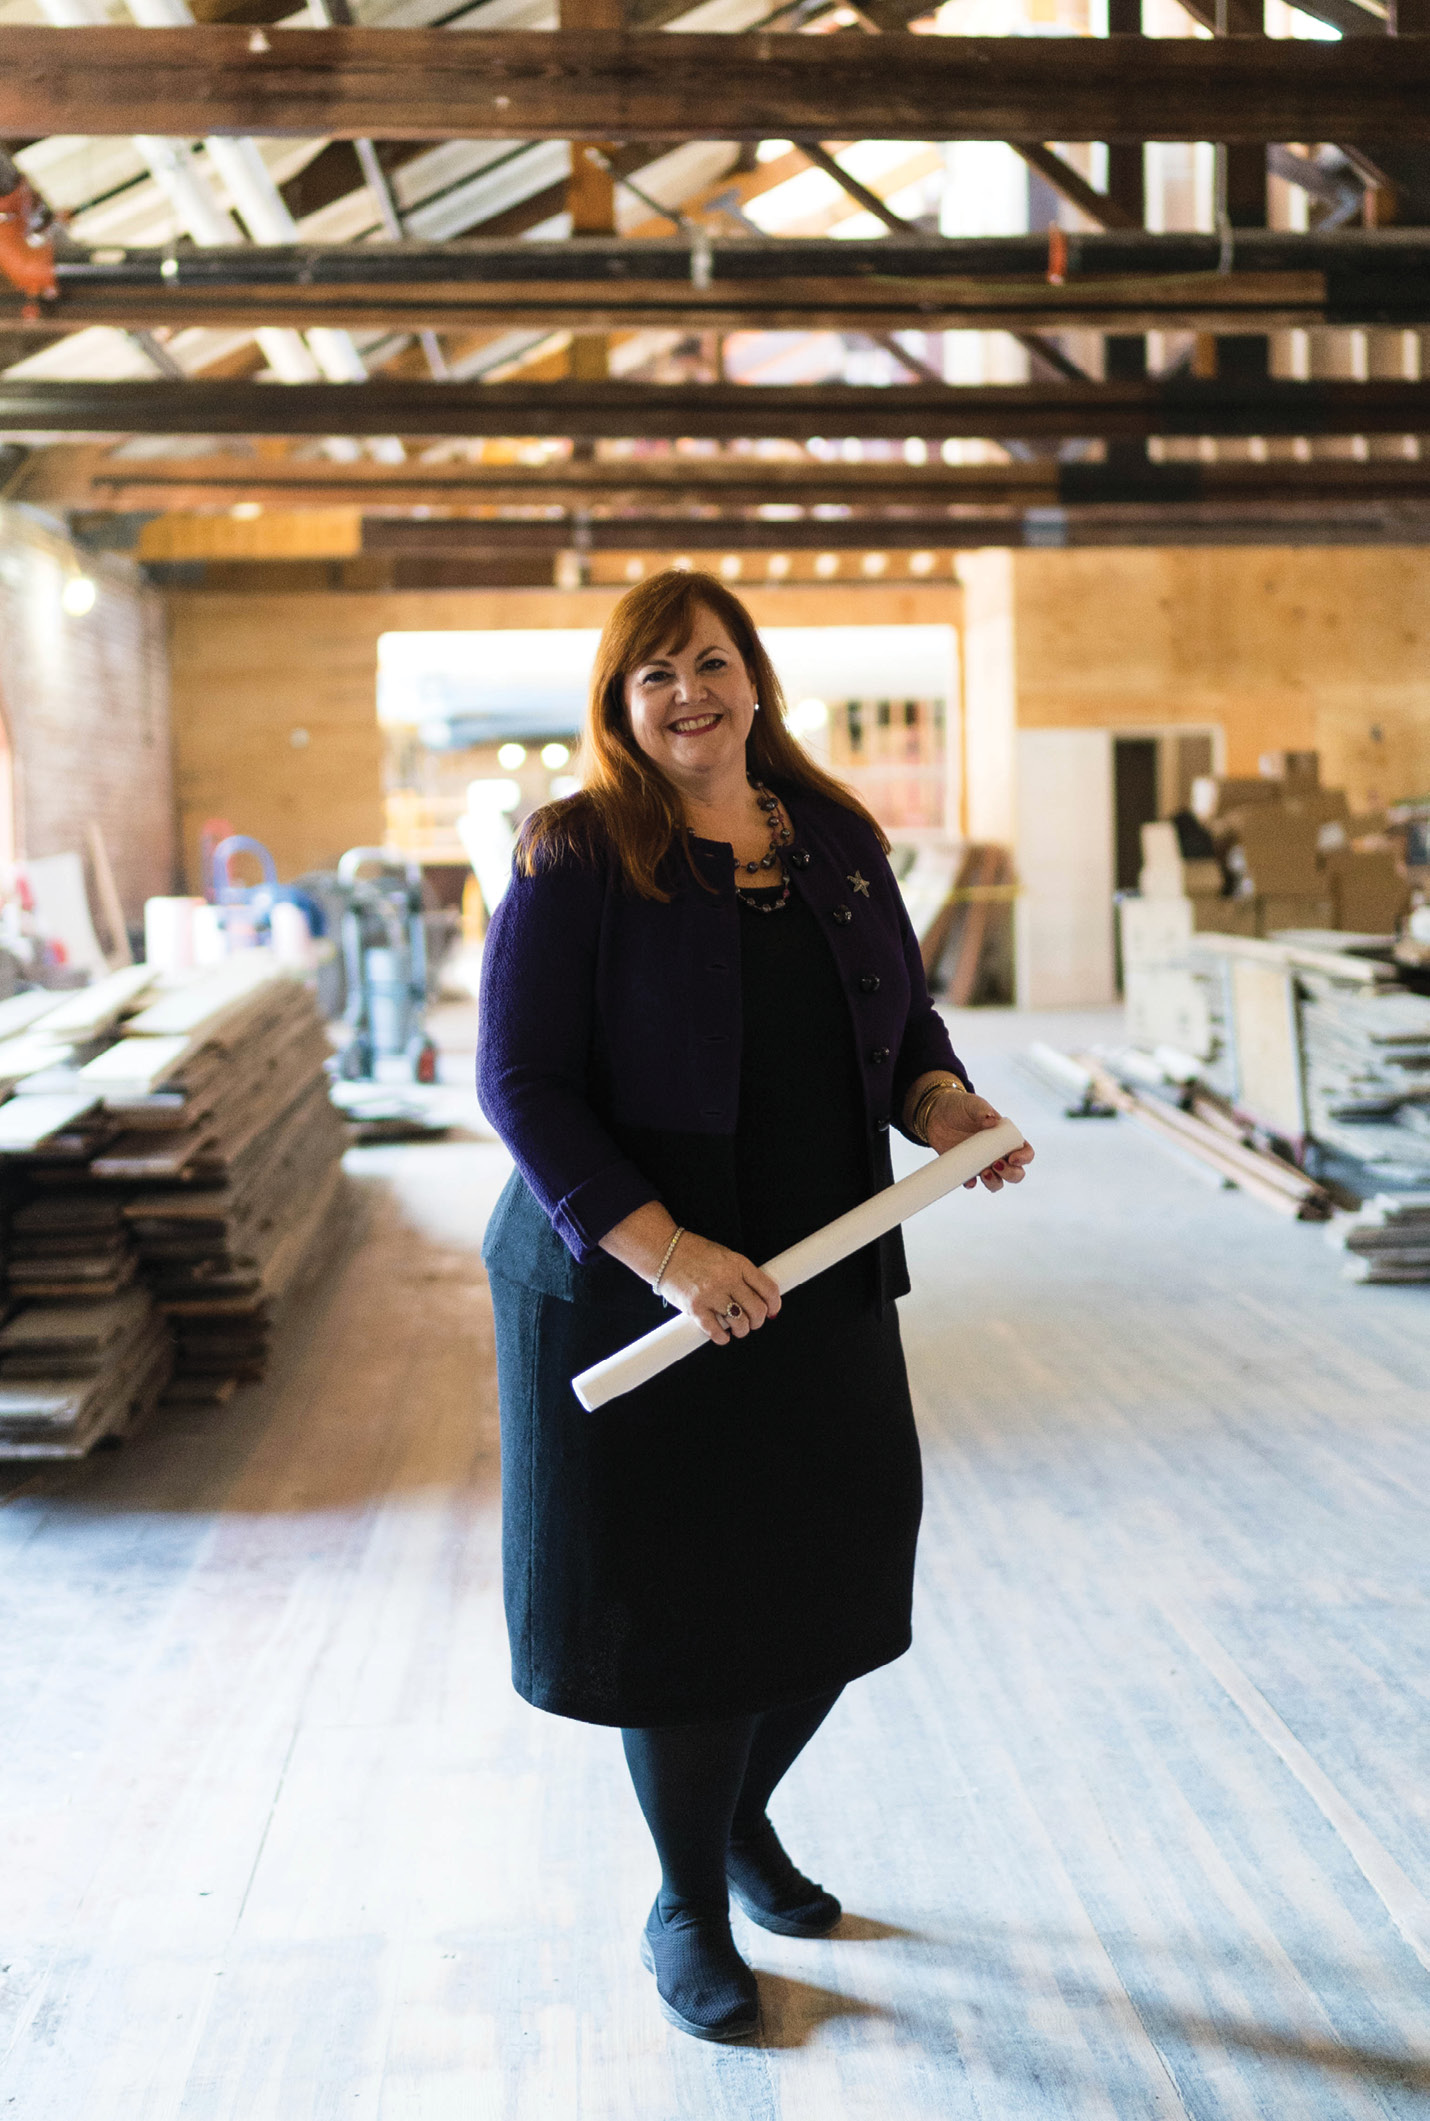 Explore Charleston CEO Helen Hill at the Charleston Visitor Center, which is being redesigned to include interactive elements, such as a demo kitchen, that are inviting for visitors and locals alike, as well as messaging to help “visitors understand that Charleston is a working city,” she says